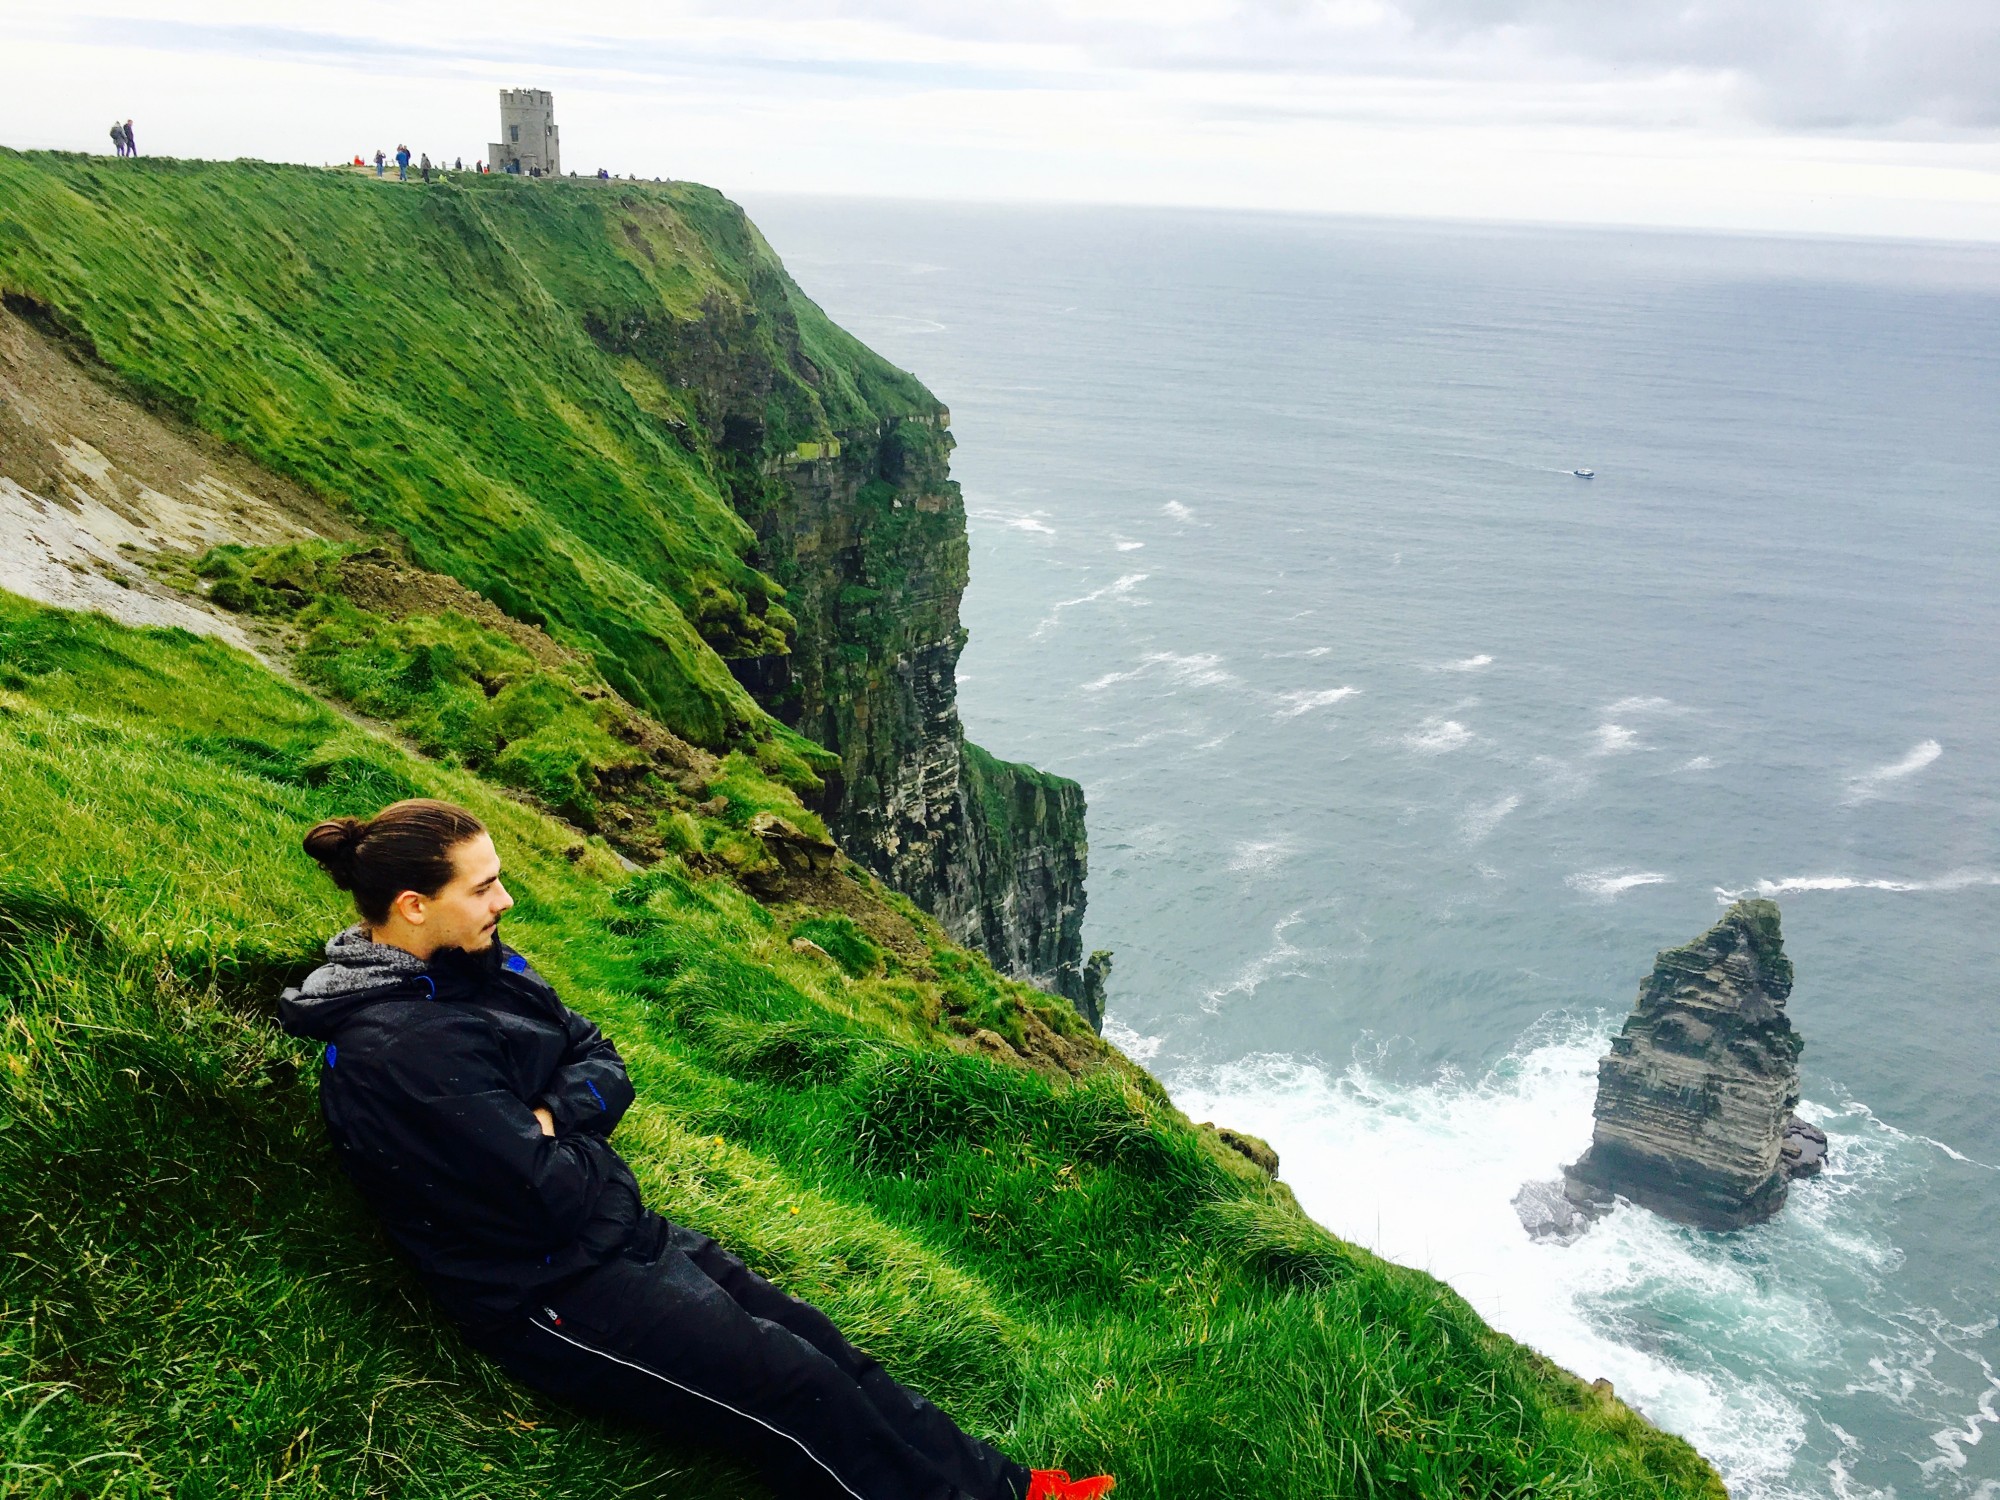 Stephan at the Cliffs of Moher